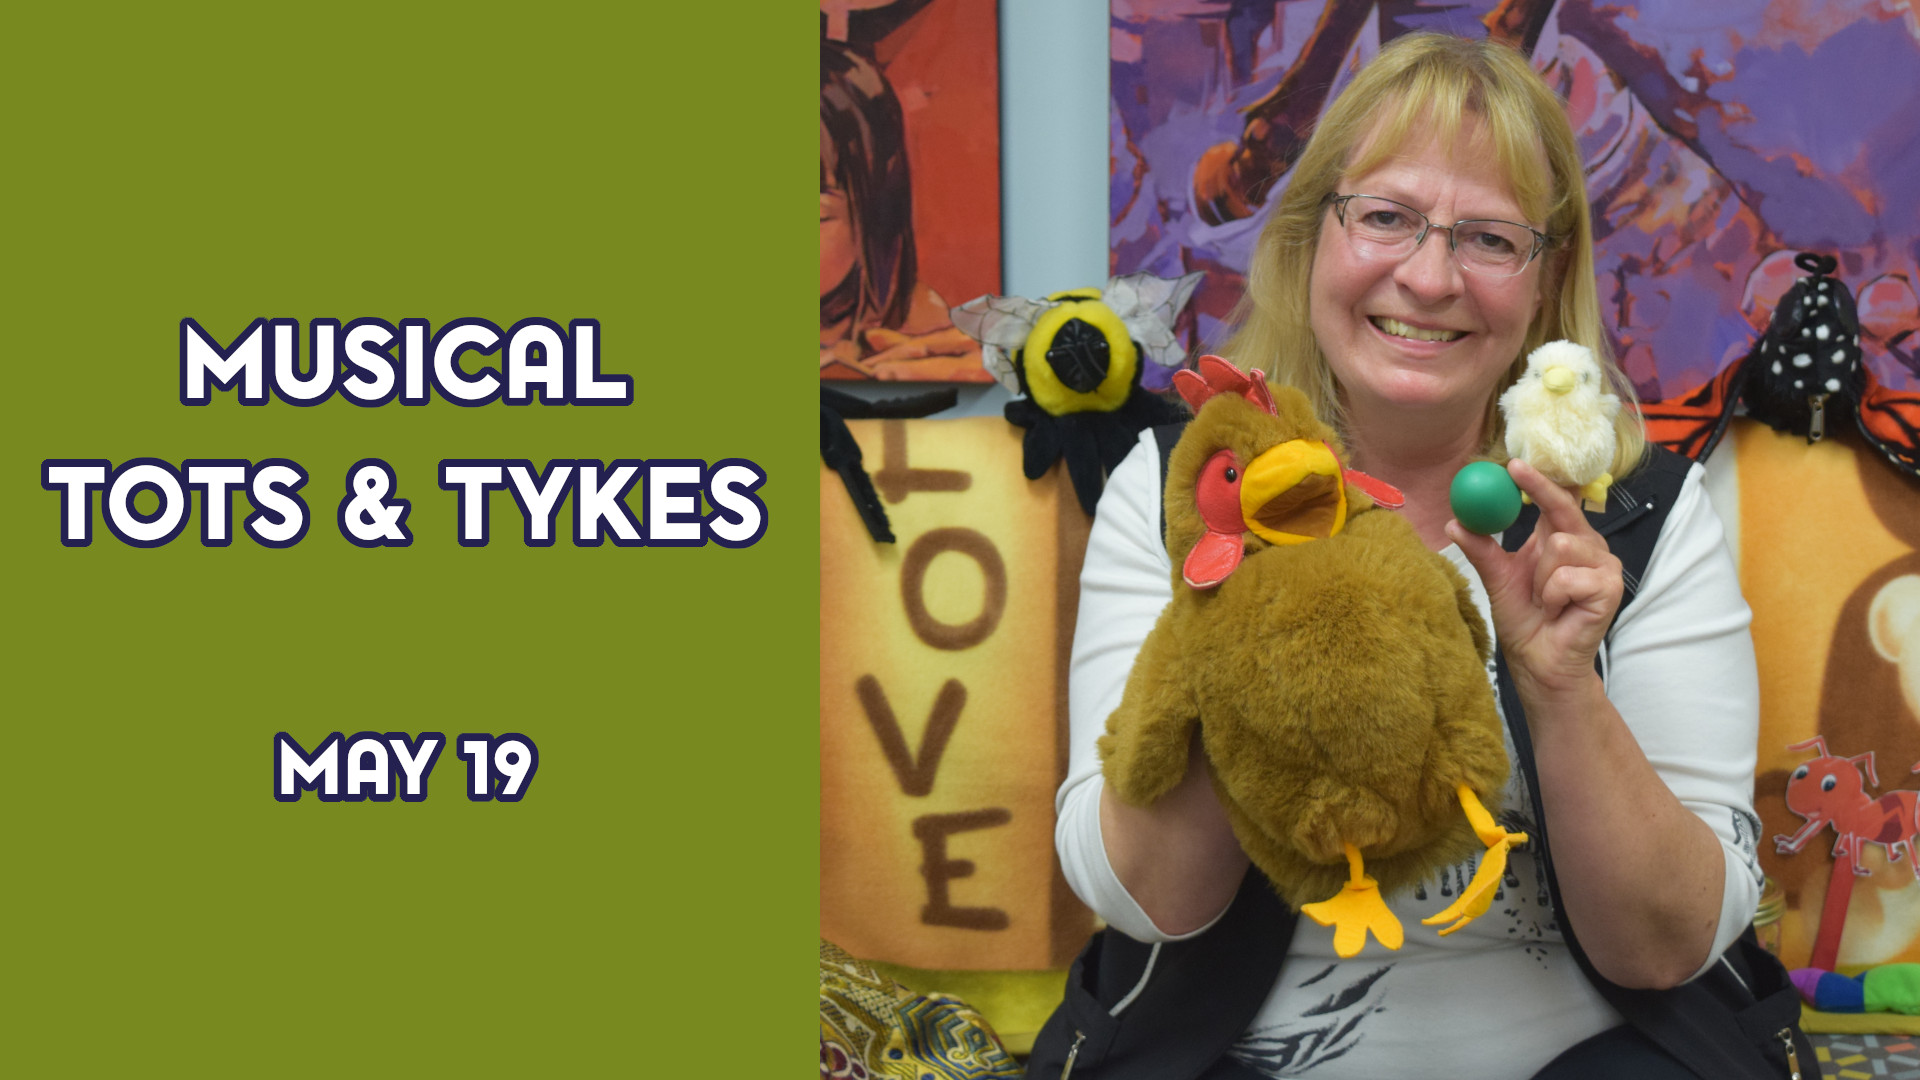 A woman holds stuffed animals next to the text "Musical Tots & Tykes May 19"